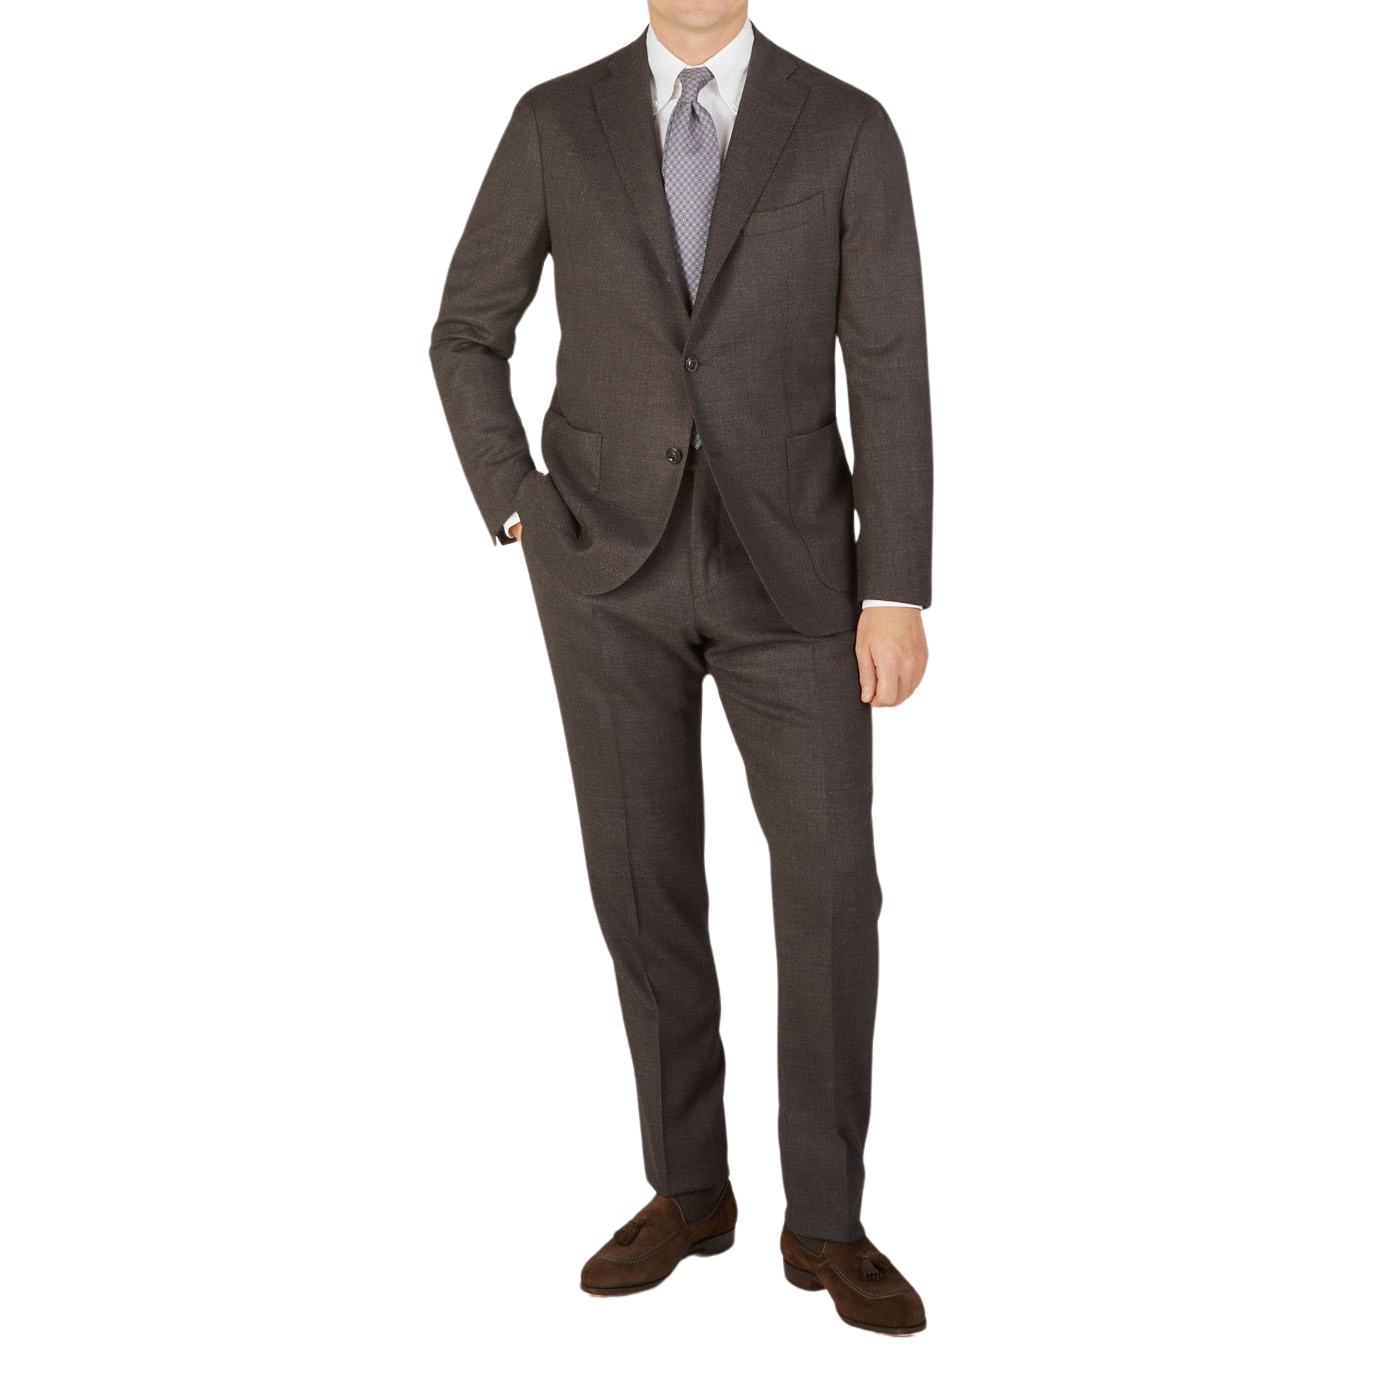 The Wool Suit: How to Choose & Wear Guide - Suits Expert